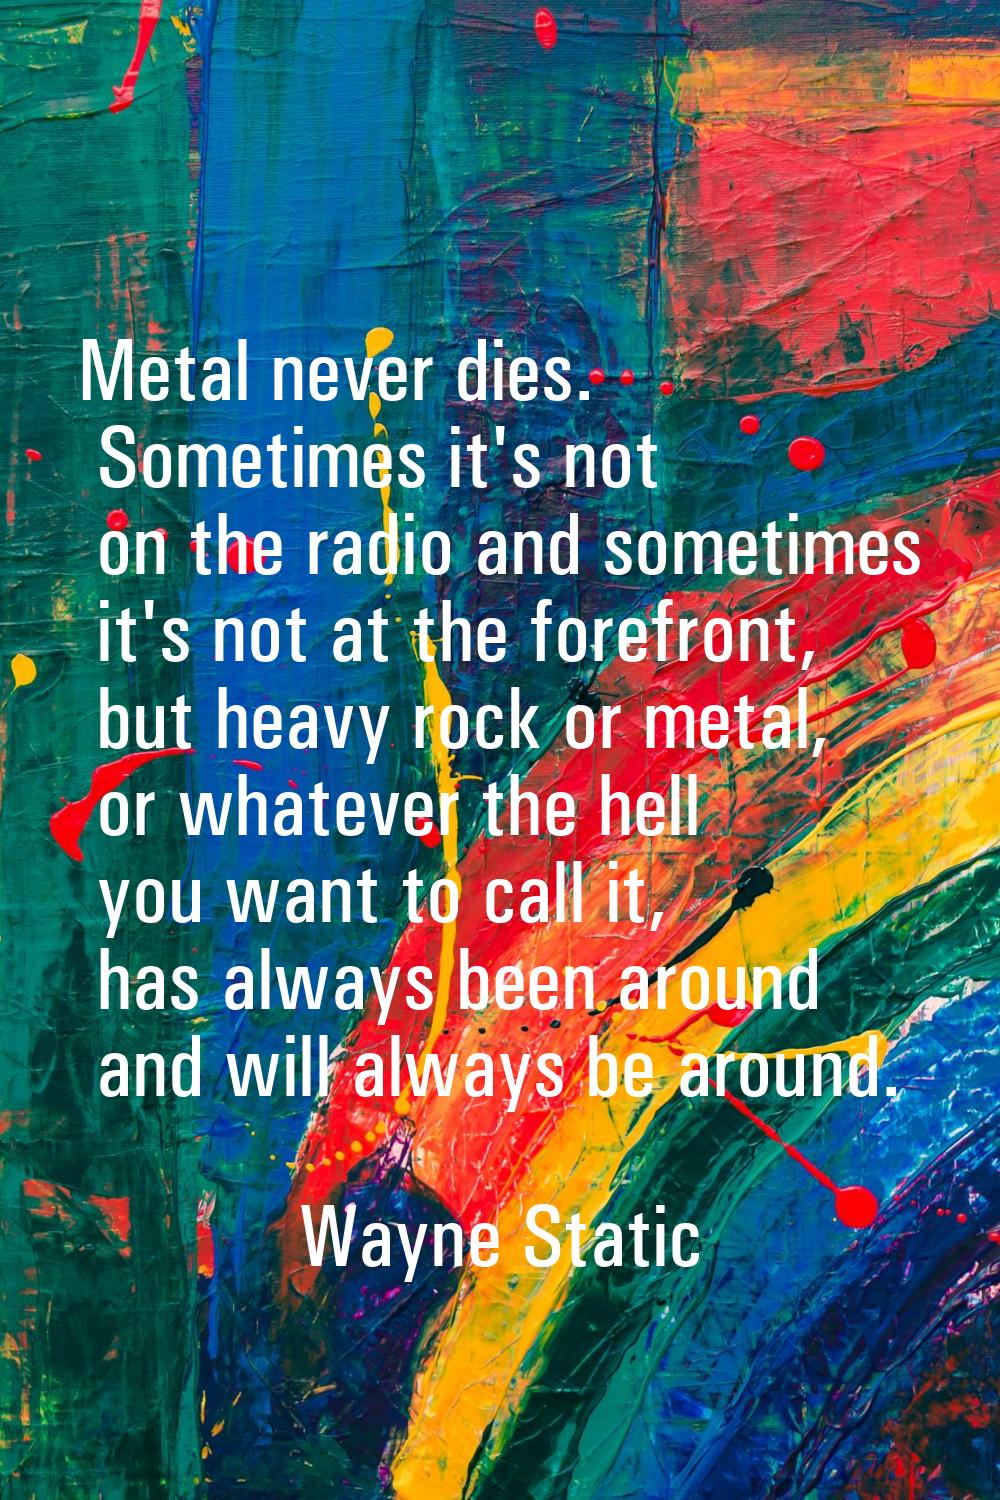 Metal never dies. Sometimes it's not on the radio and sometimes it's not at the forefront, but heav